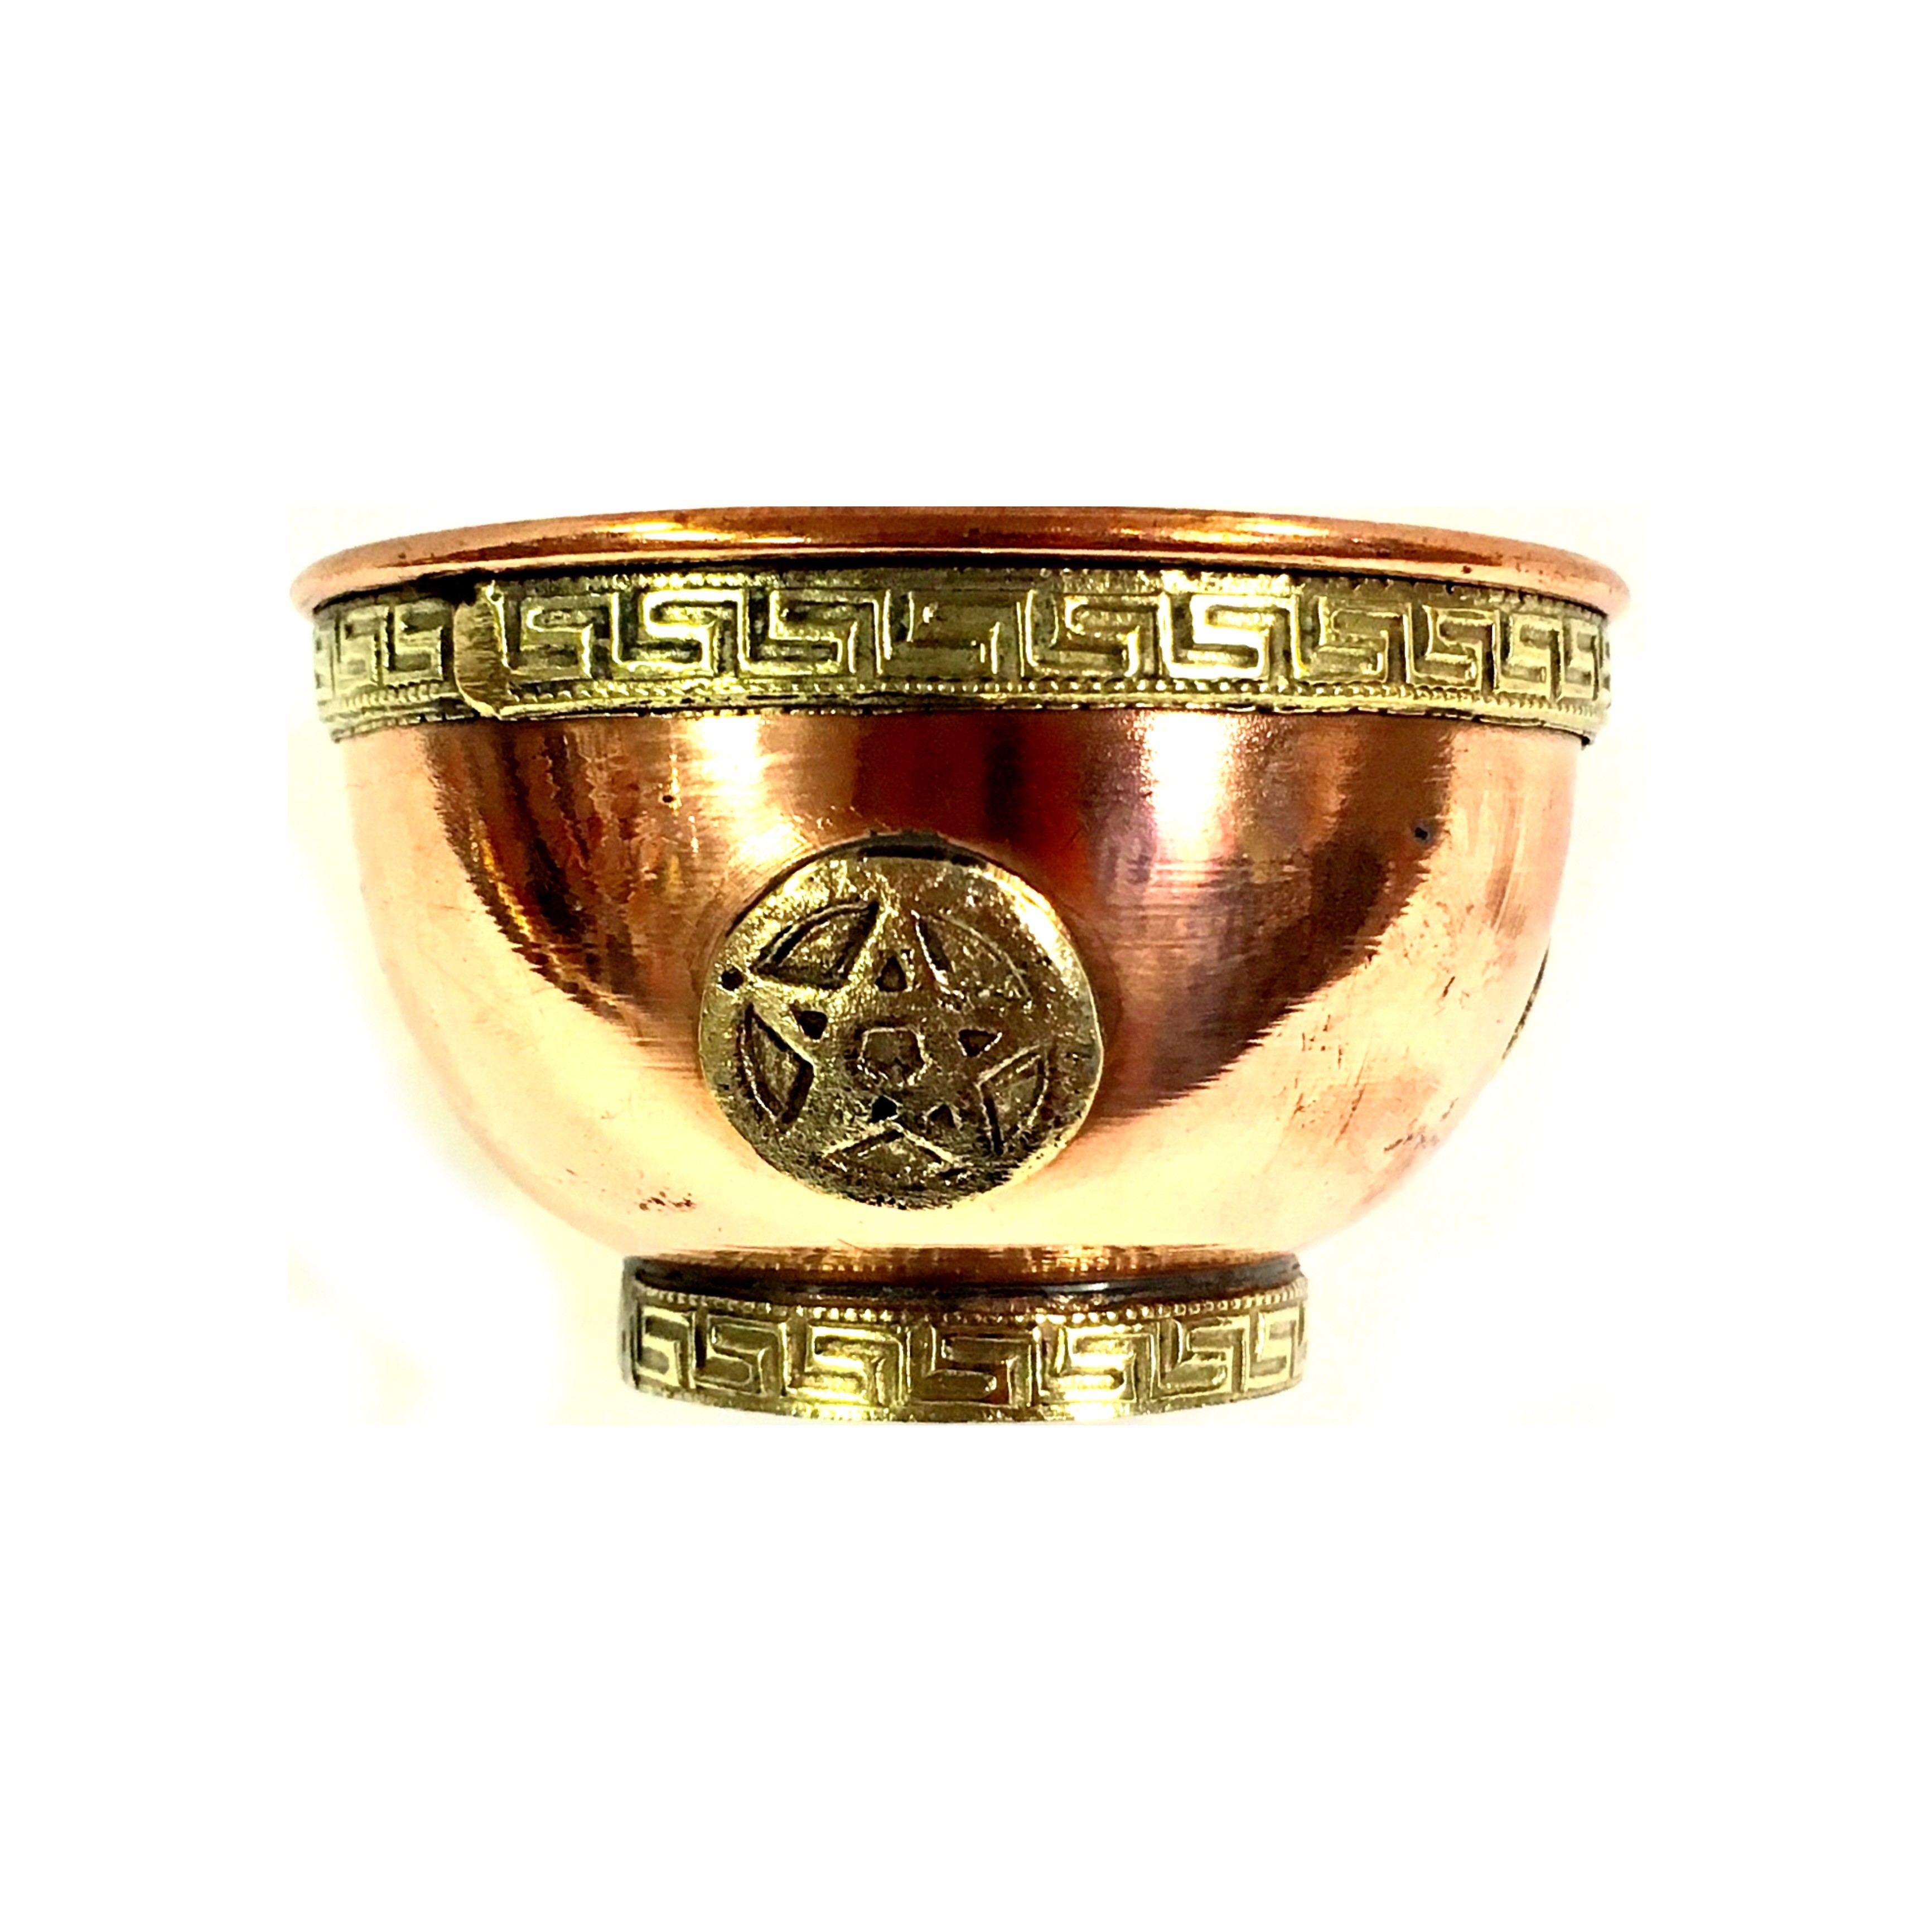 Pentacle - Small Copper & Brass Incense Bowl